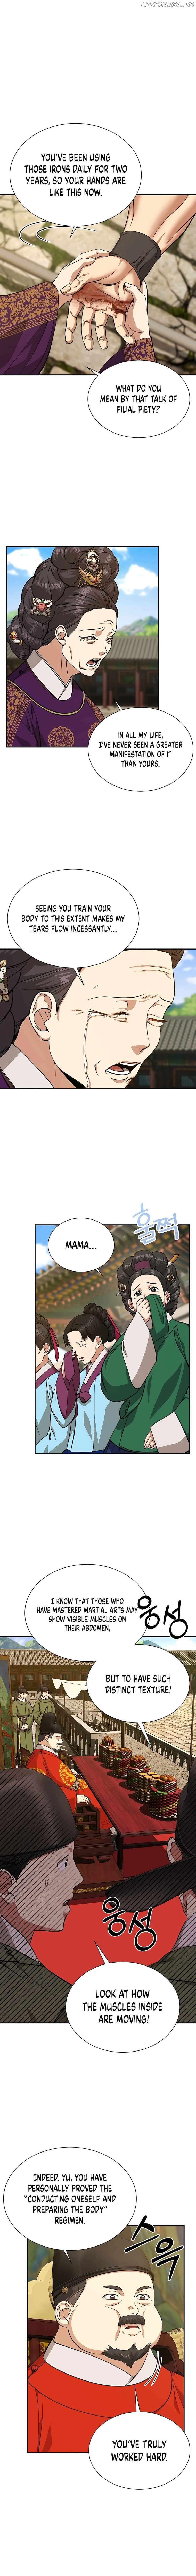 Muscle joseon Chapter 10 - Page 3